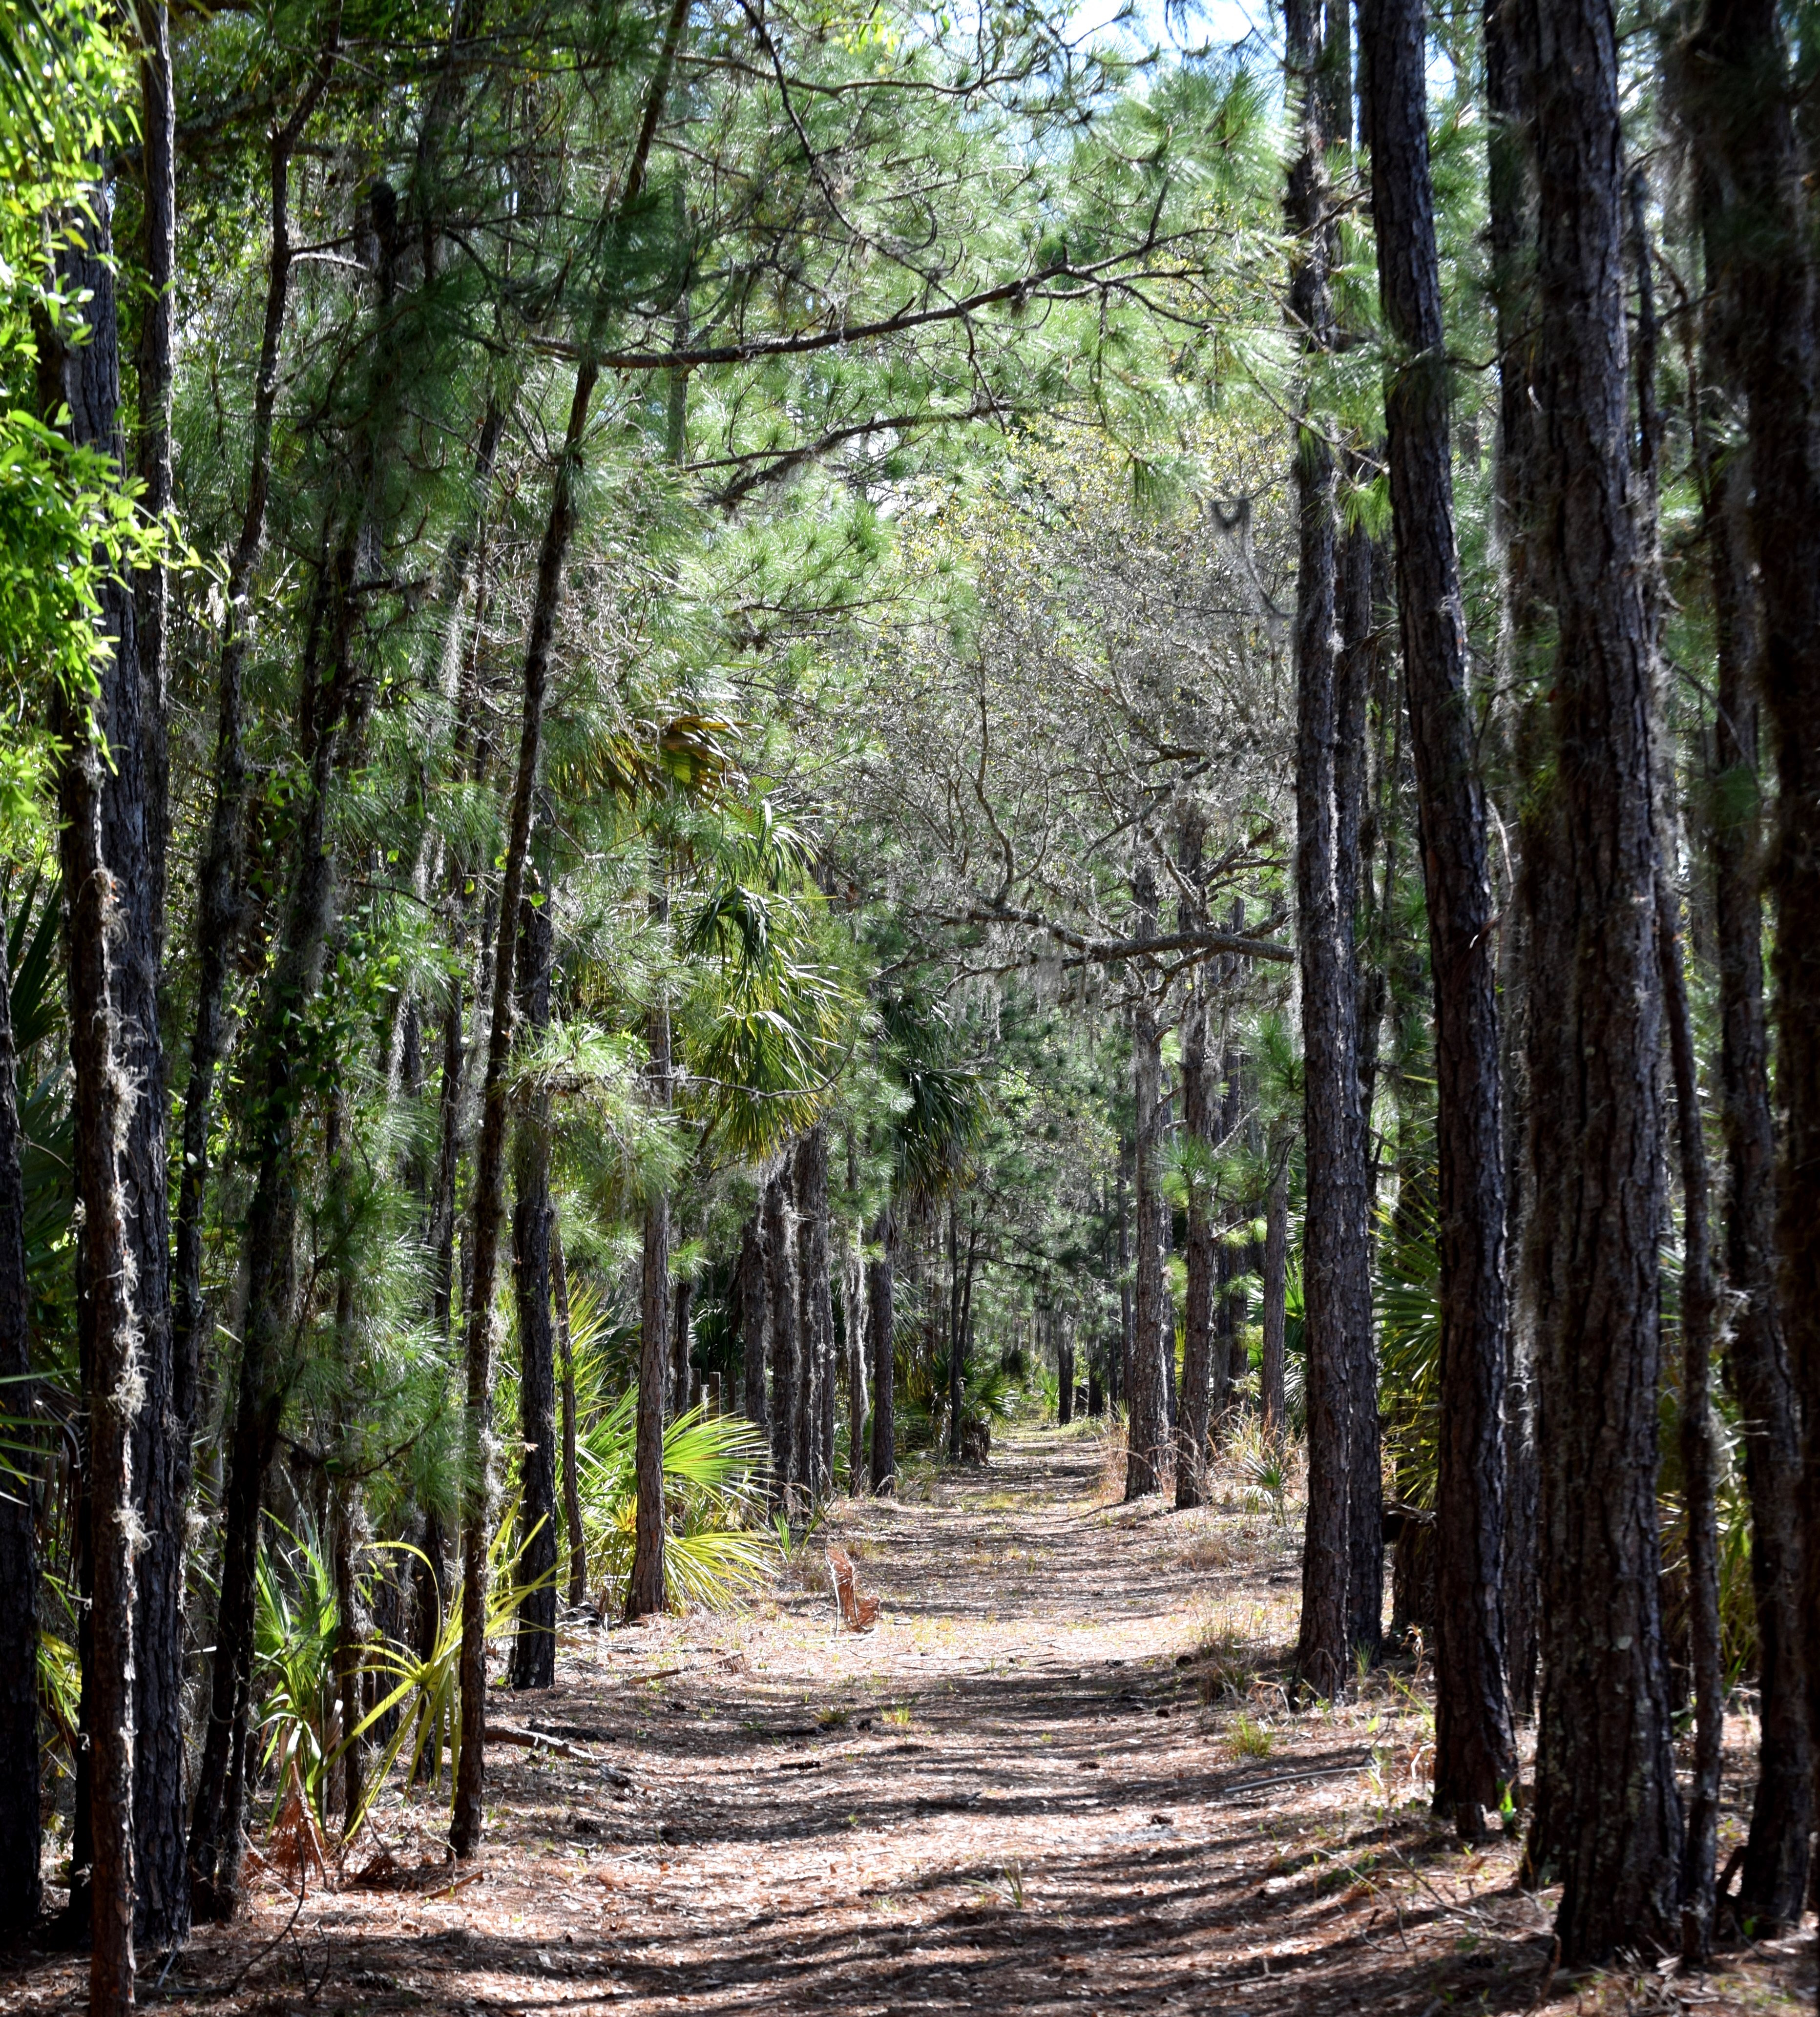 A cleared walking trail within a high-canopy forest